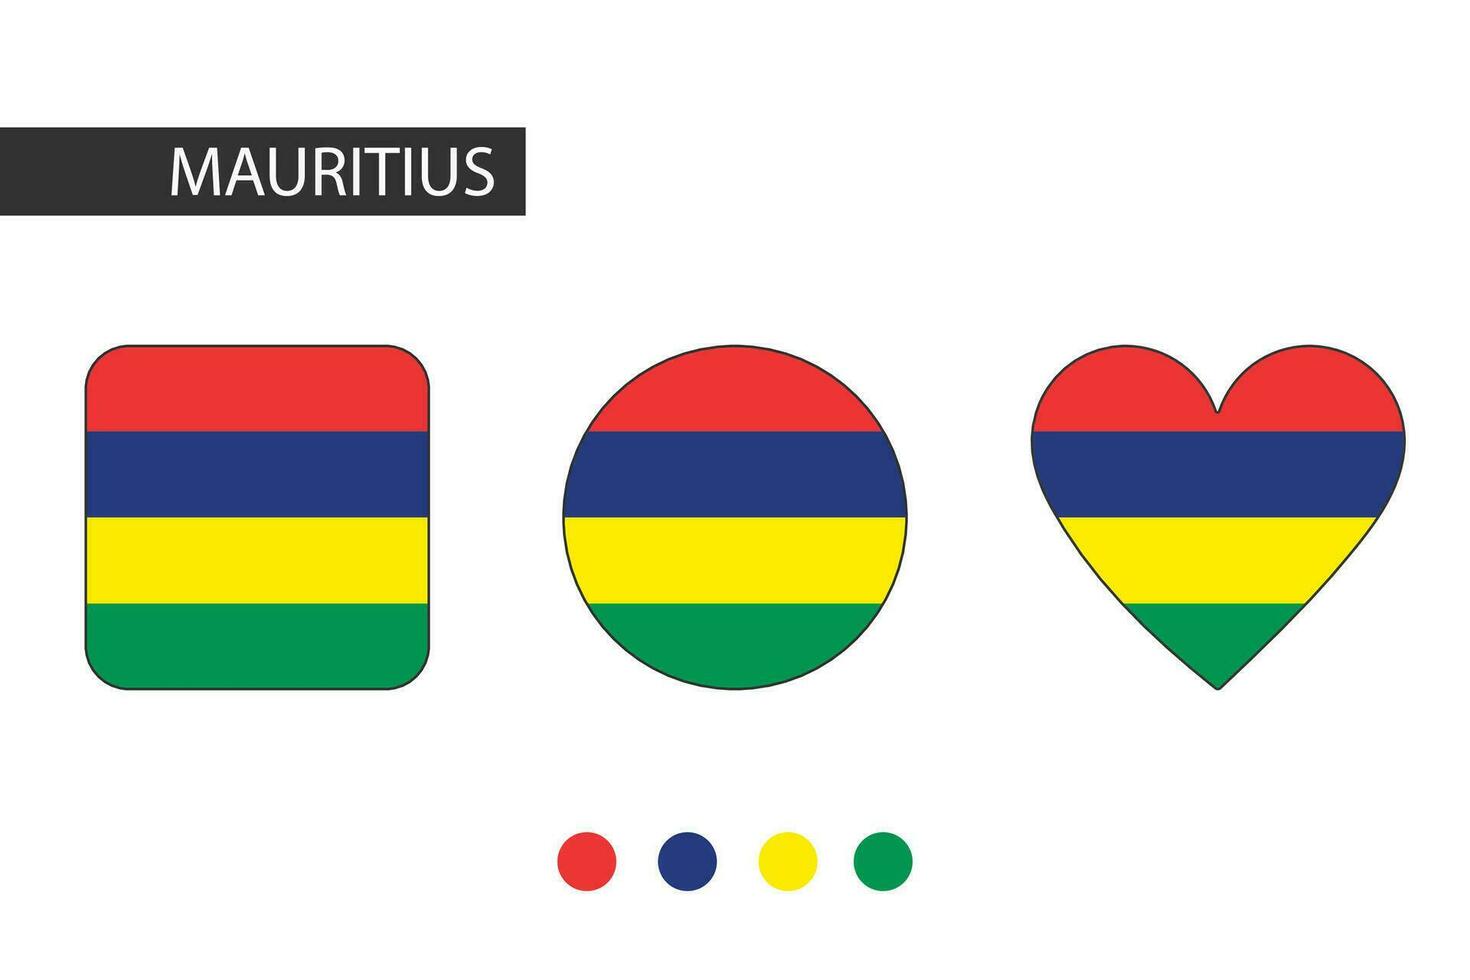 Mauritius 3 shapes square, circle, heart with city flag. Isolated on white background. vector